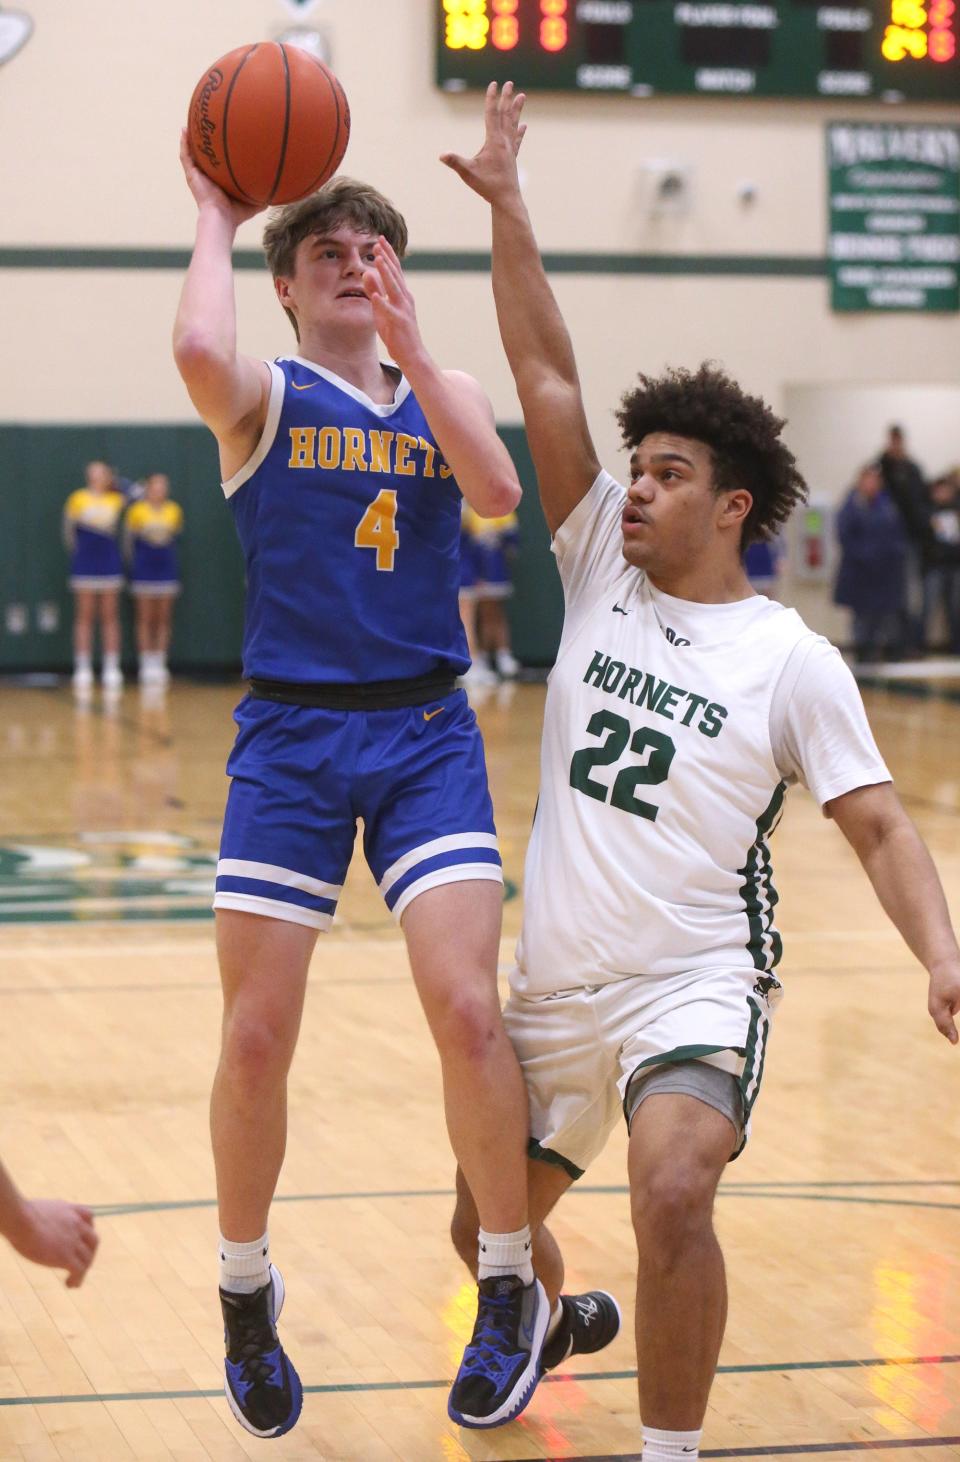 Luke Riley, 4, of East Canton takes a takes a shot while being guarded by Bryson White, 22, of Malvern during their game at Malvern on Friday, Jan. 28, 2022.